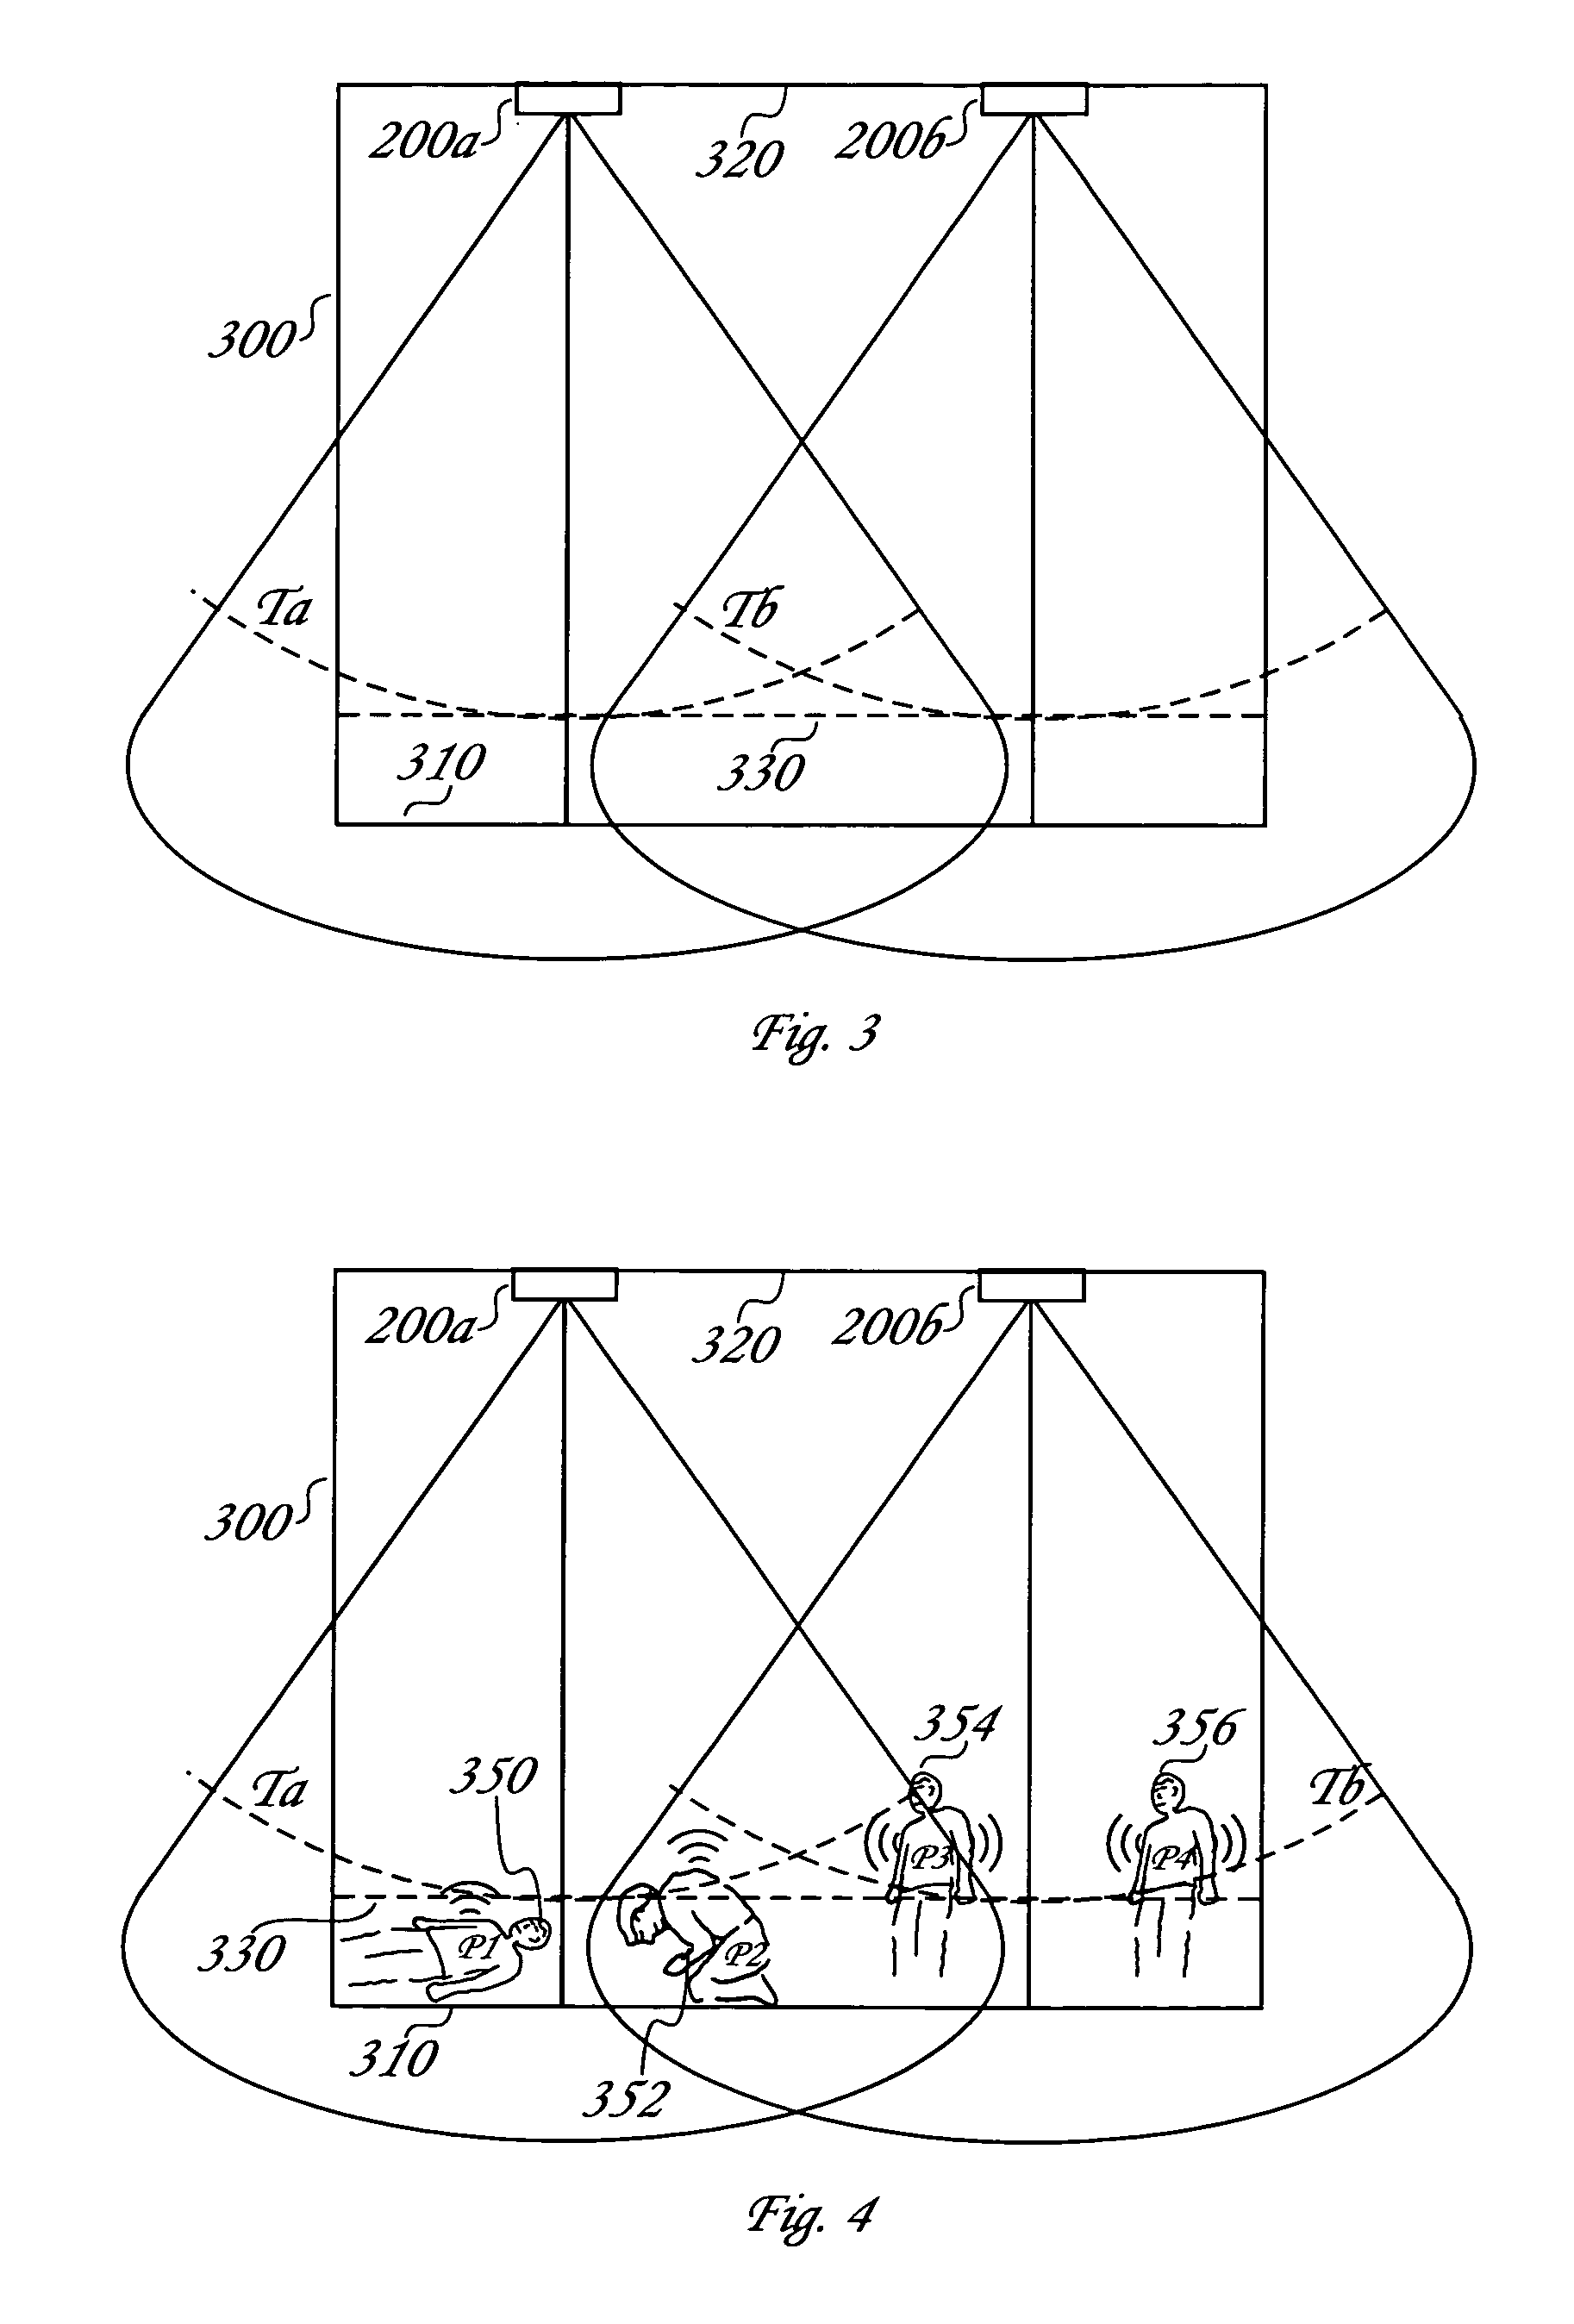 Method and apparatus for a body position monitor and fall detector using radar